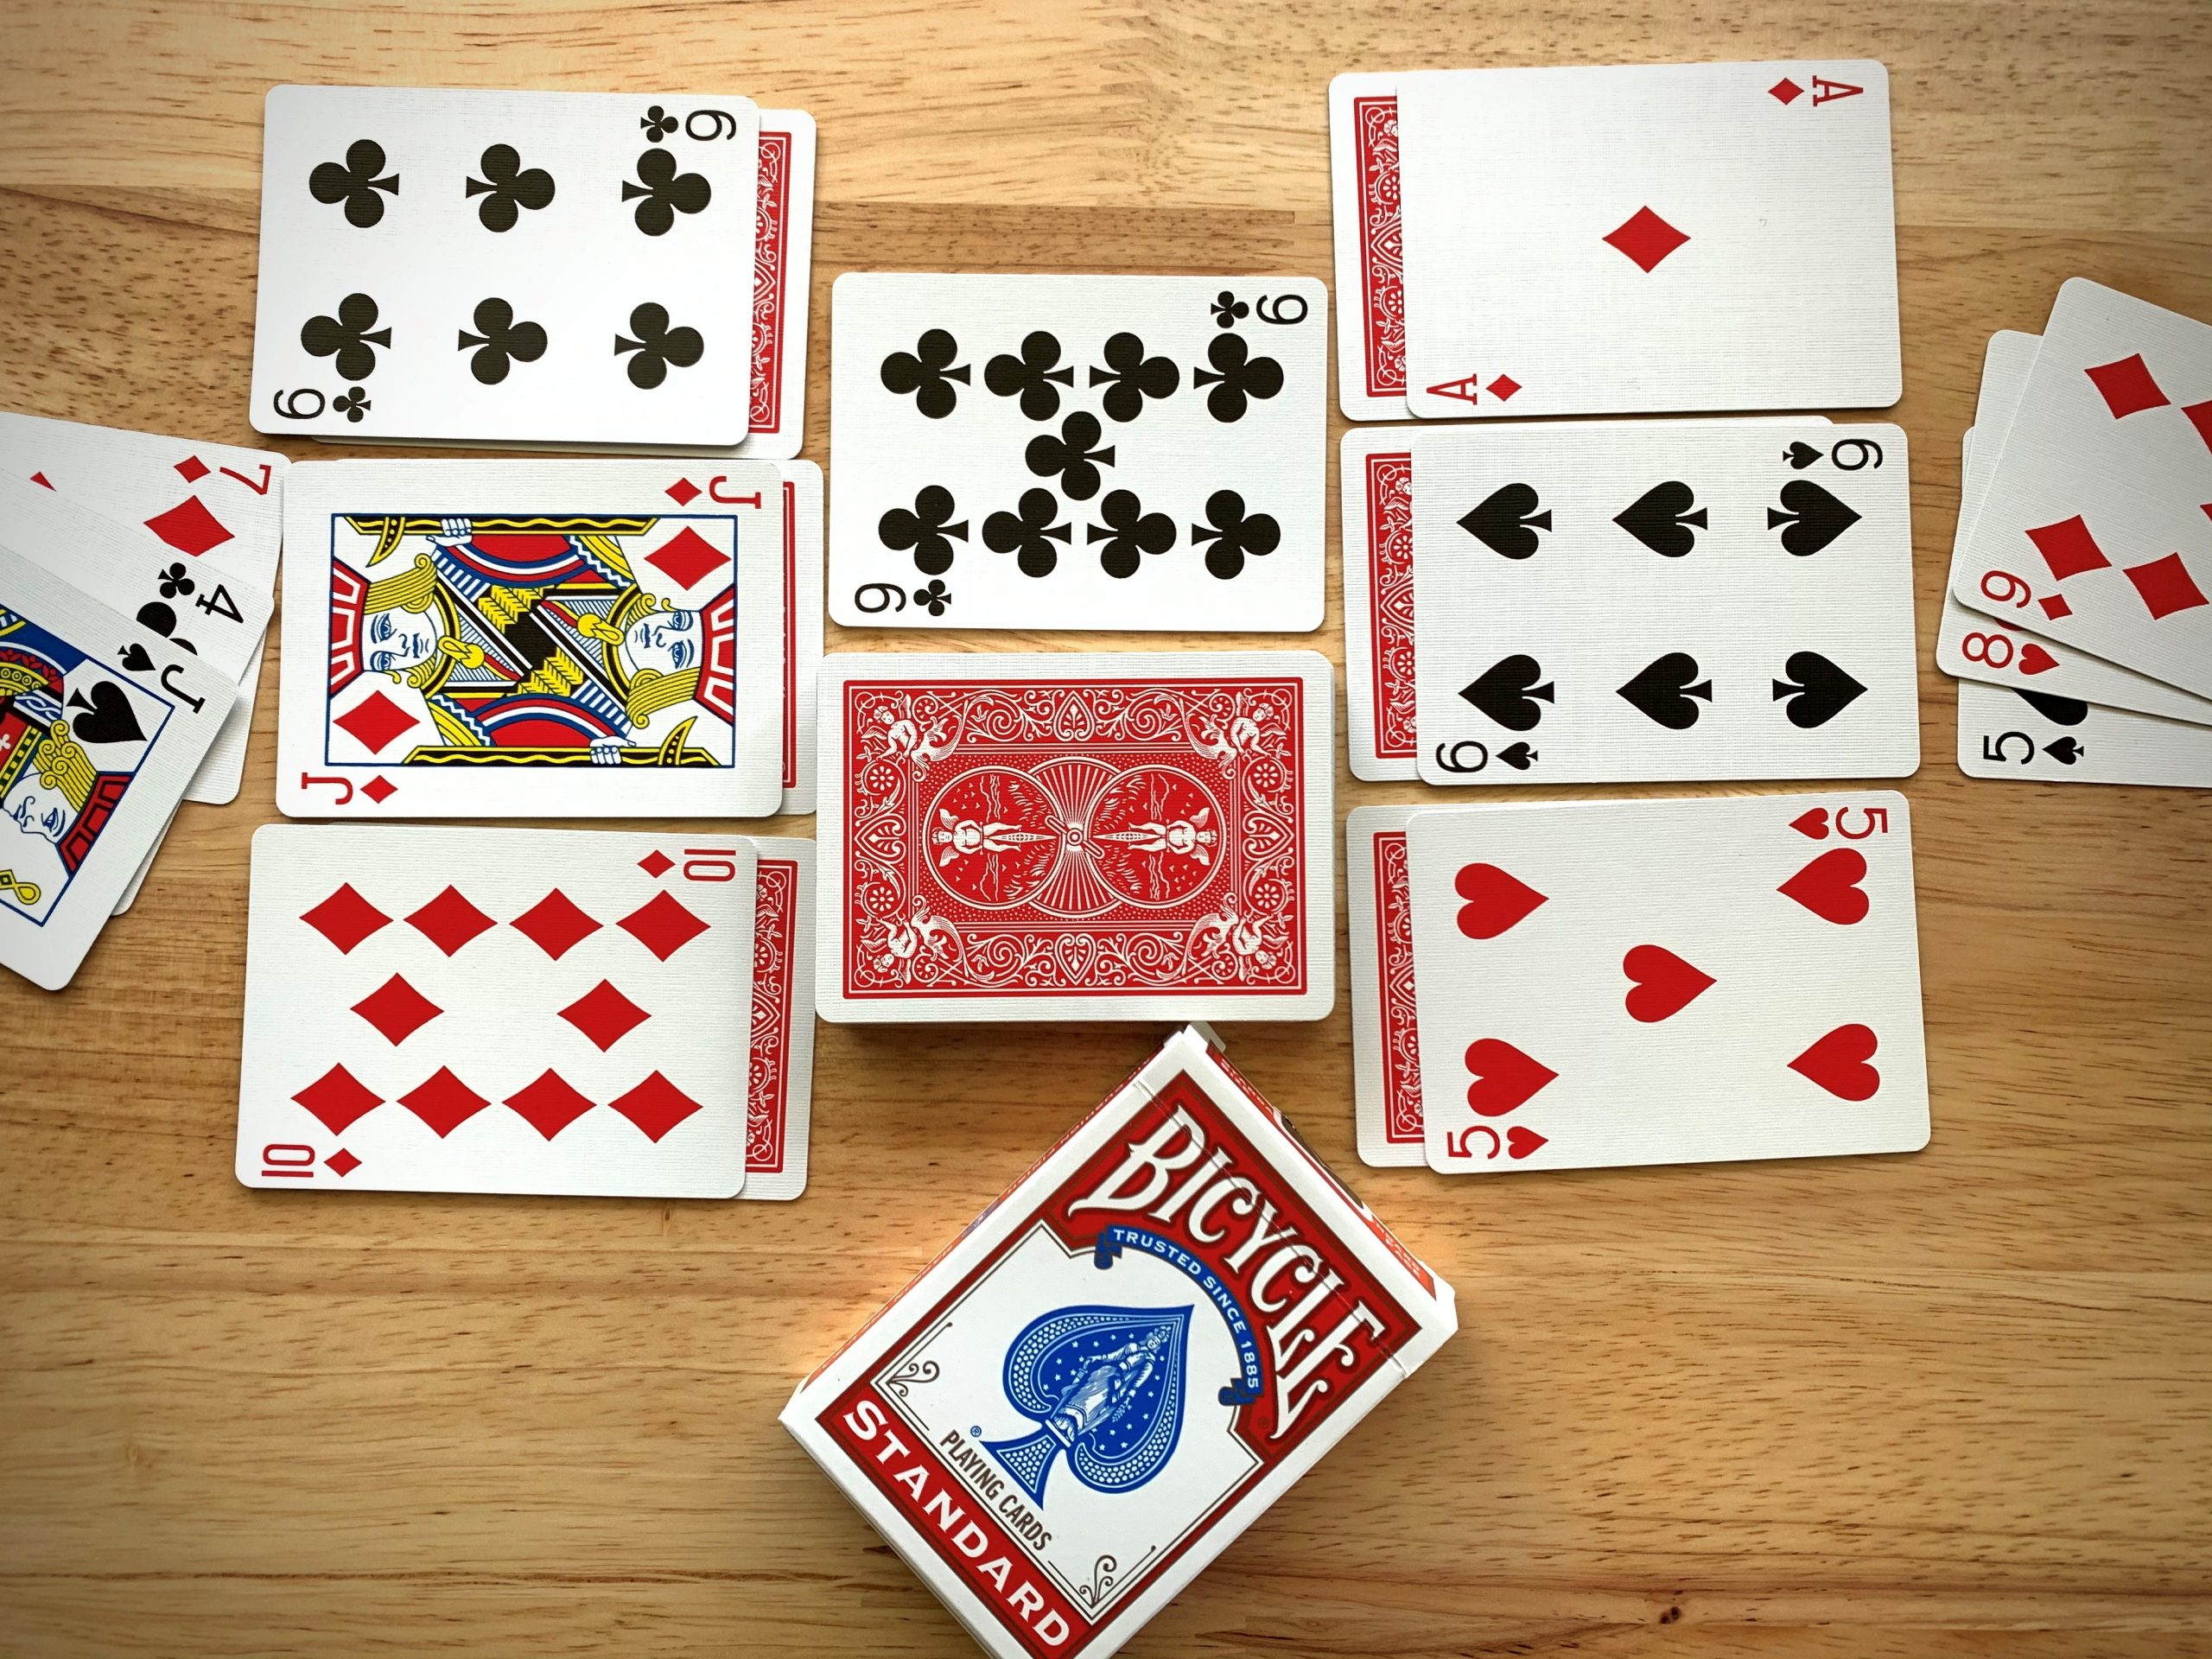 Palace Card Game Rules and How to Play